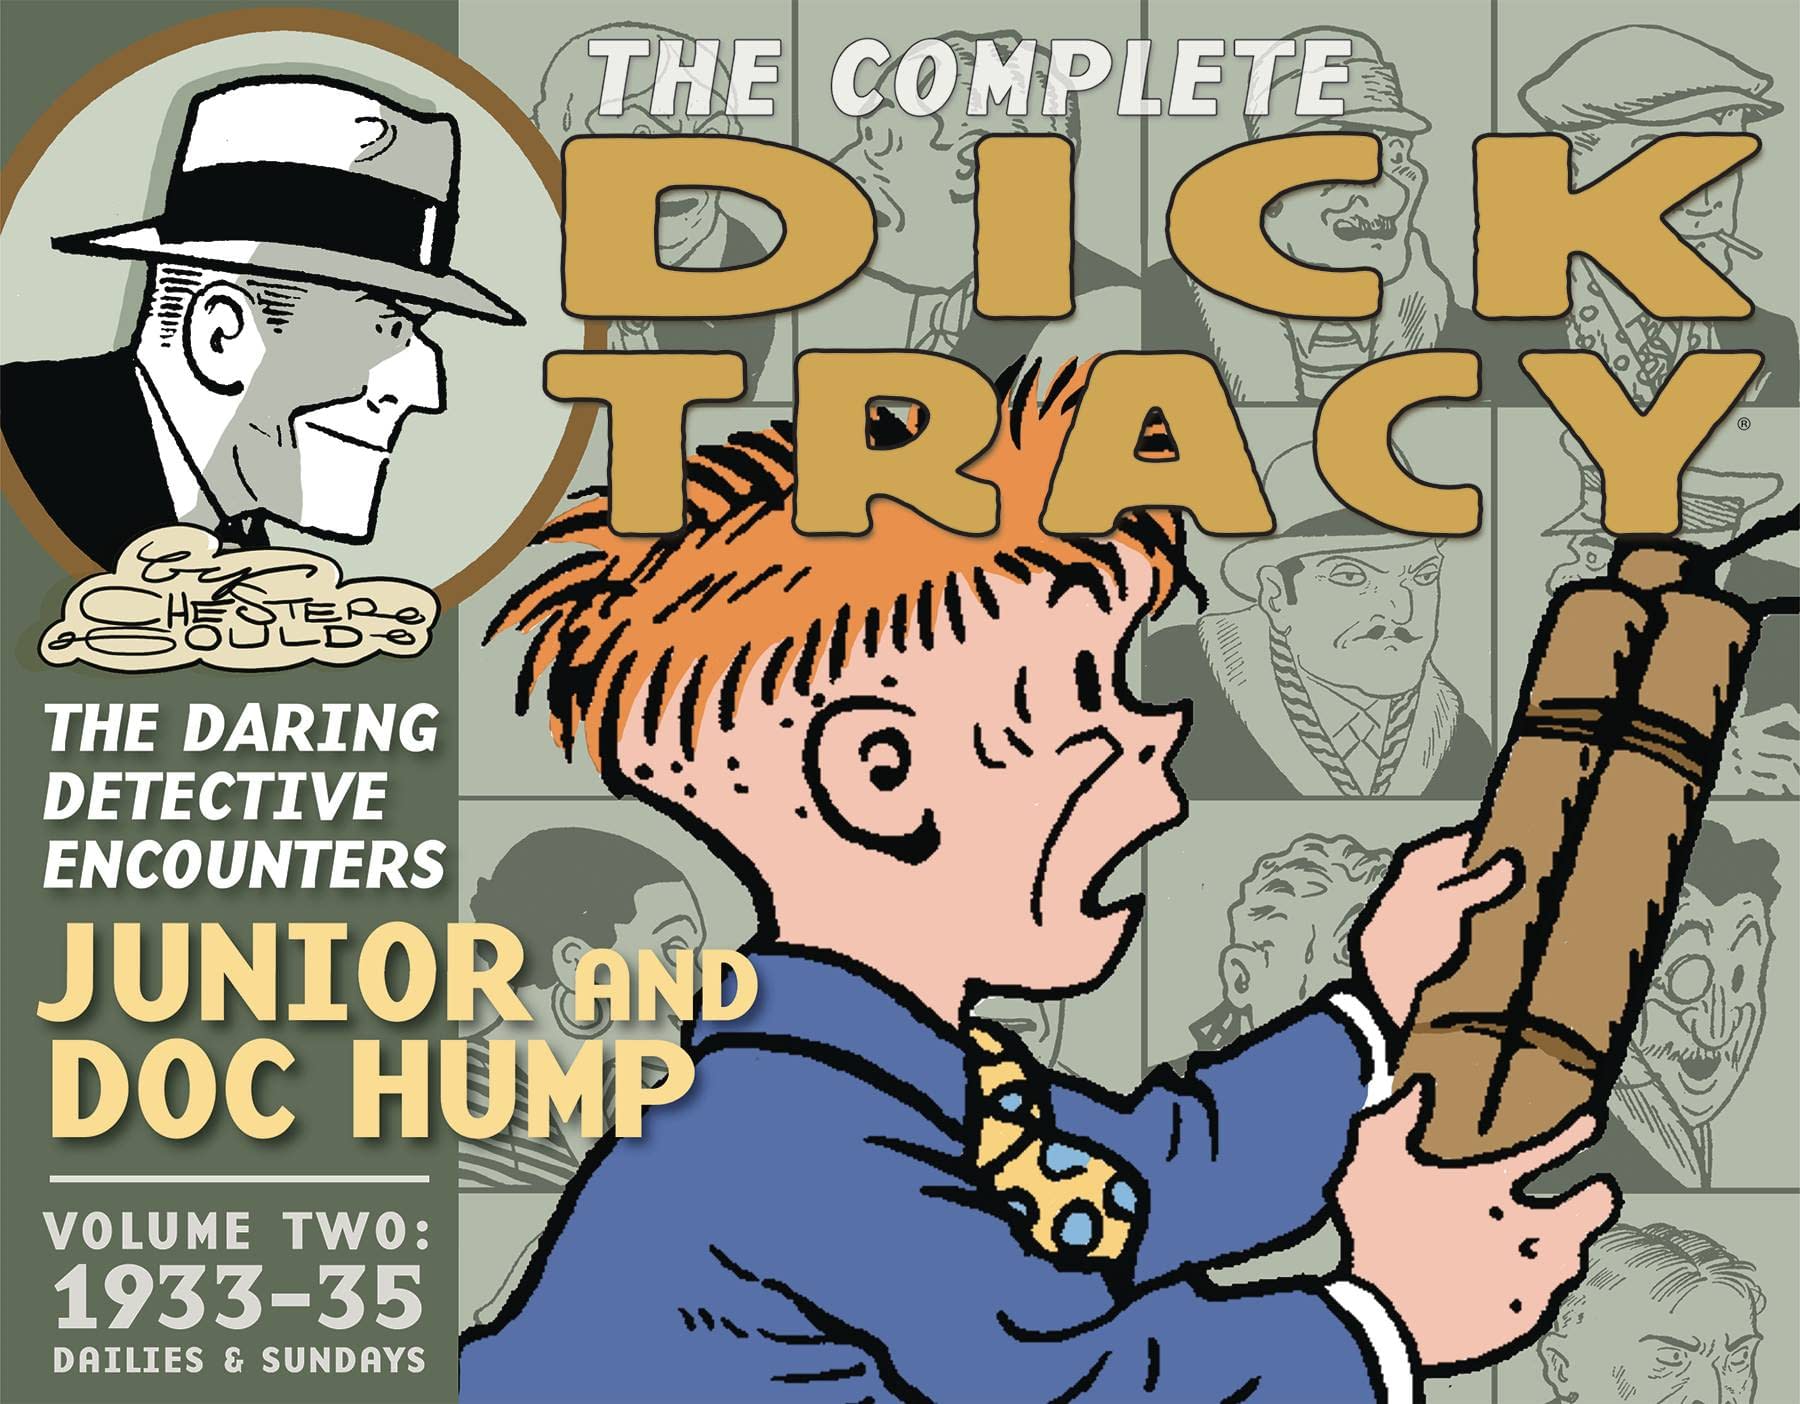 Clover Press To Republish Complete Dick Tracy photo